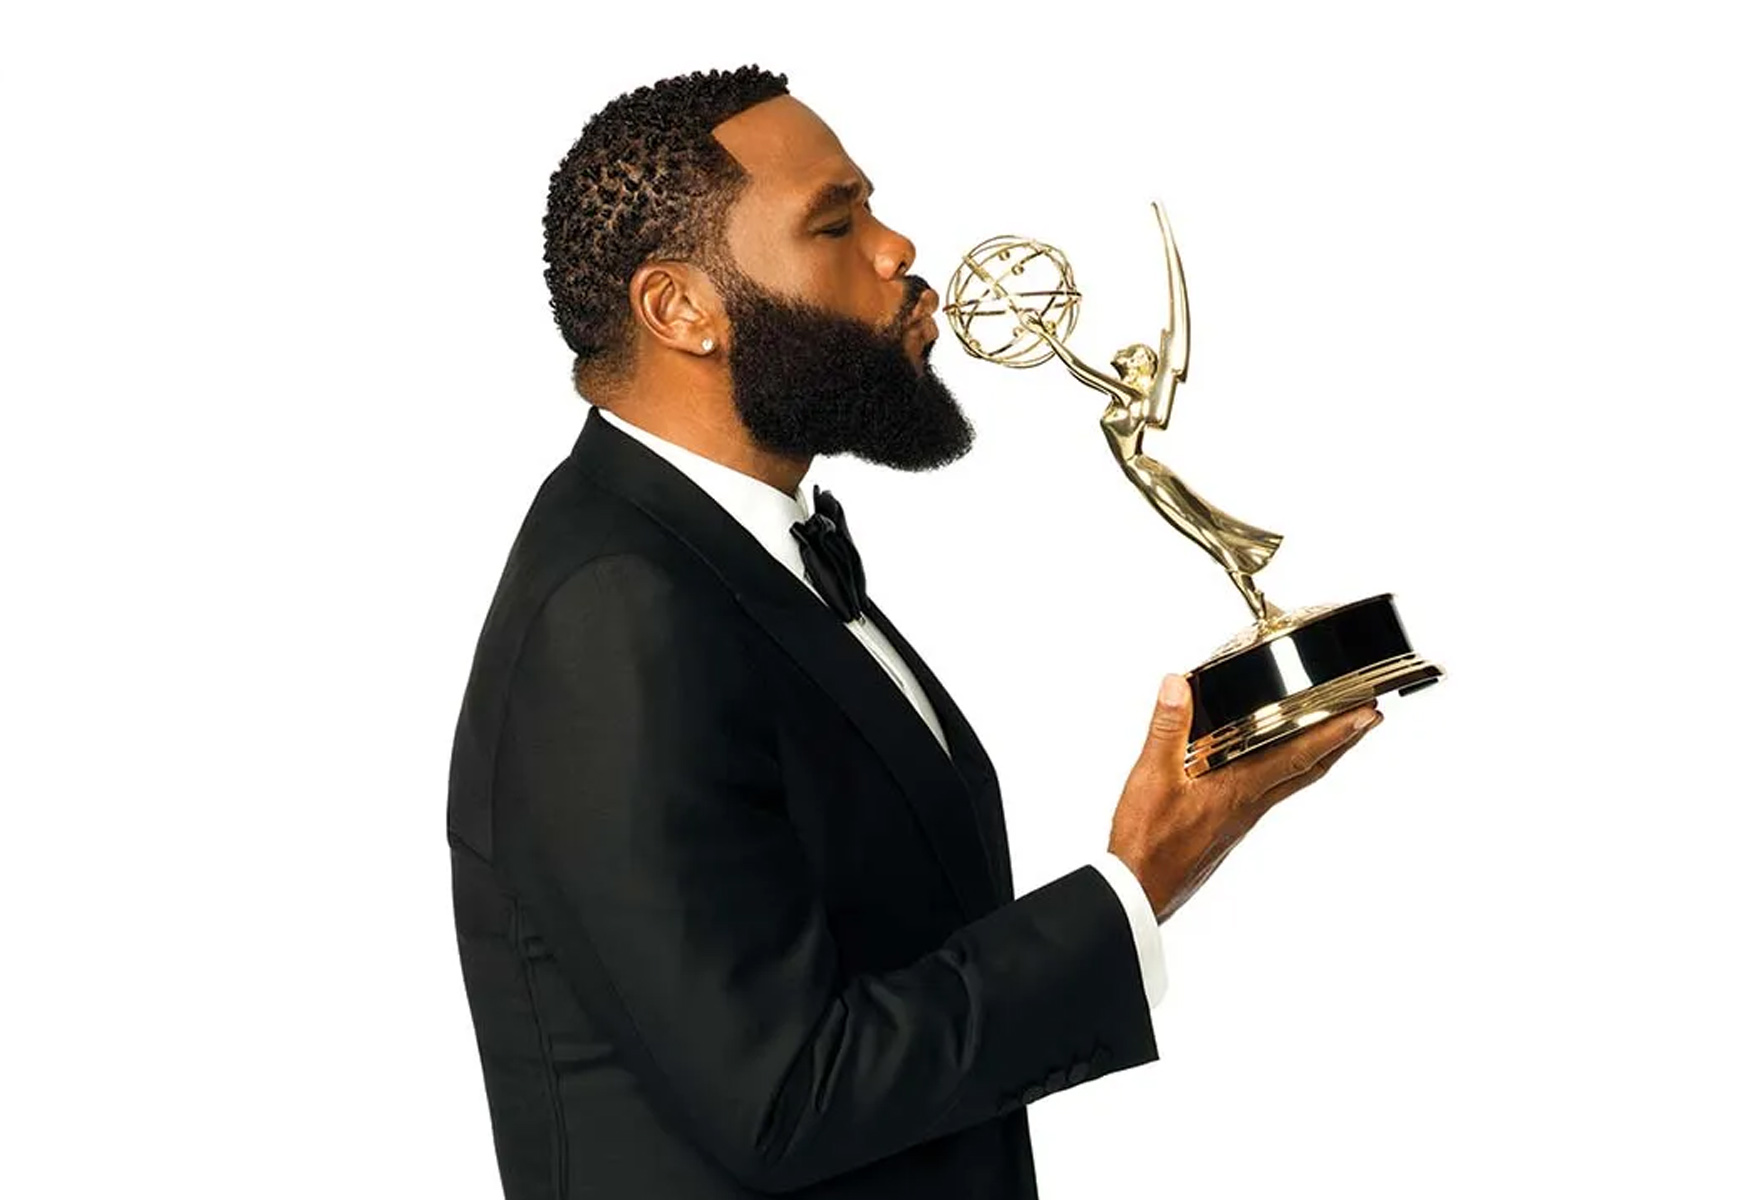 anthony-anderson-expresses-interest-in-hosting-oscars-receives-praise-from-celebrities-after-emmys